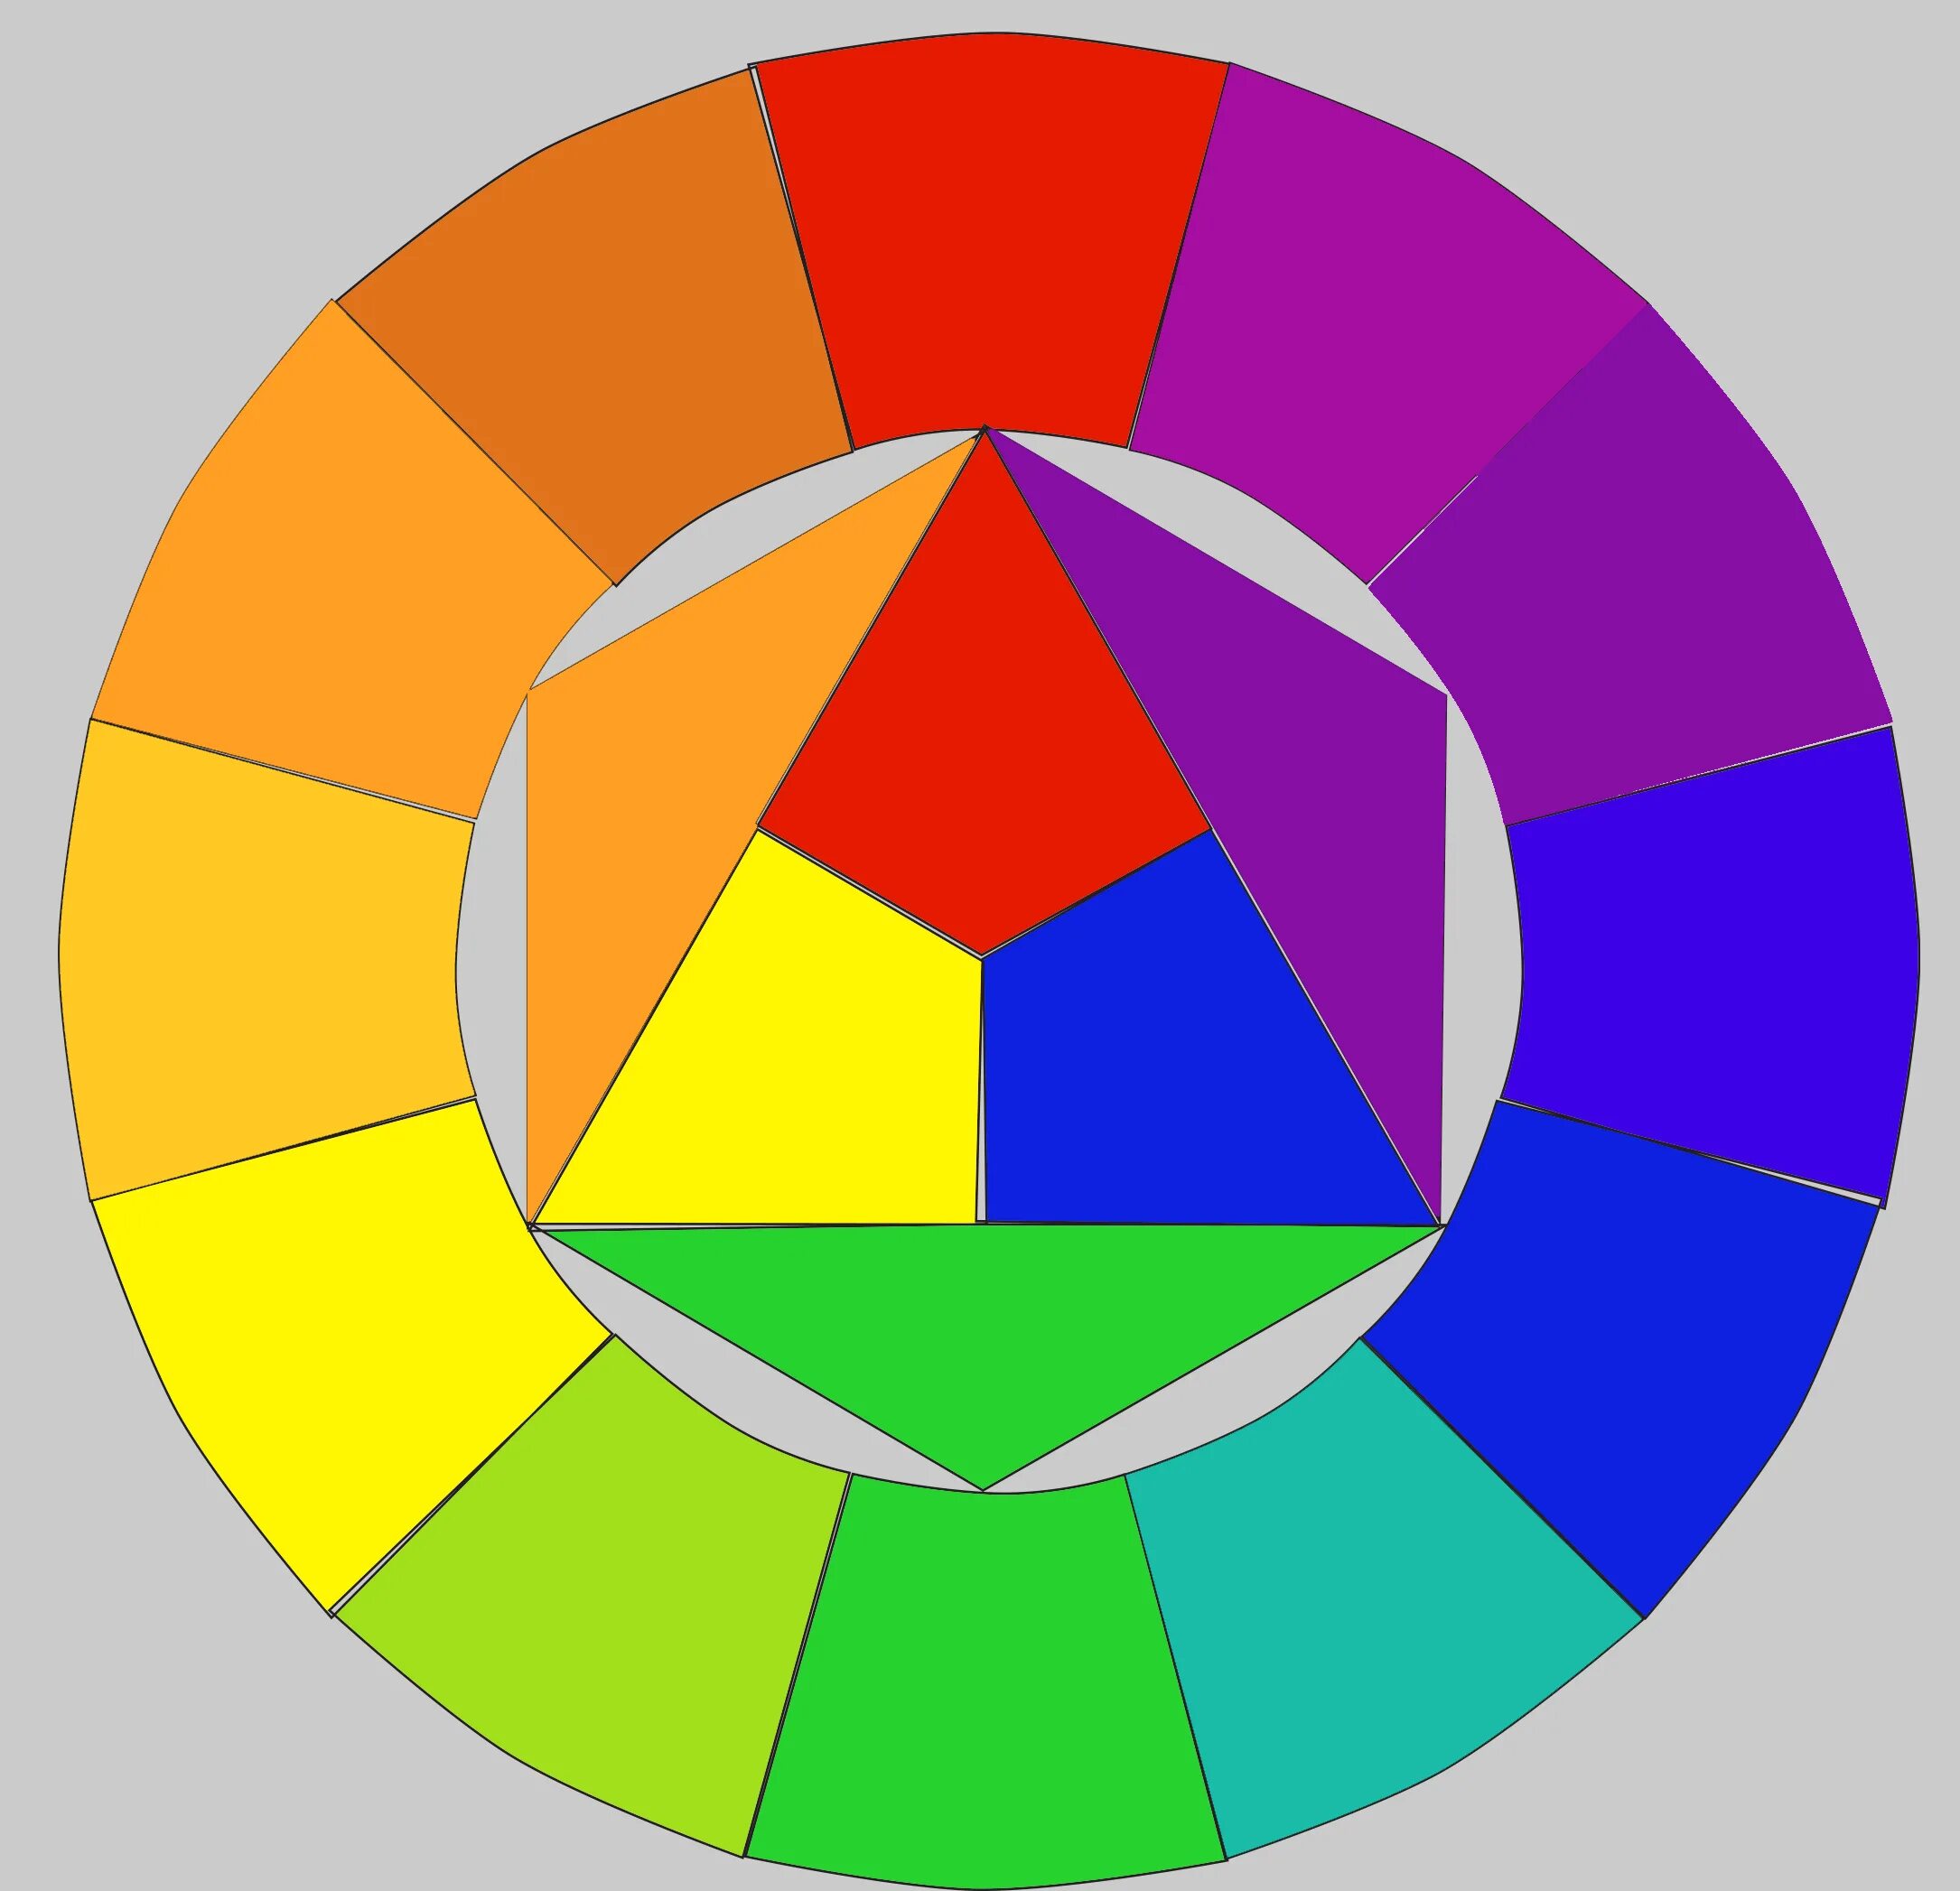 Itten's fun coloring of the color wheel